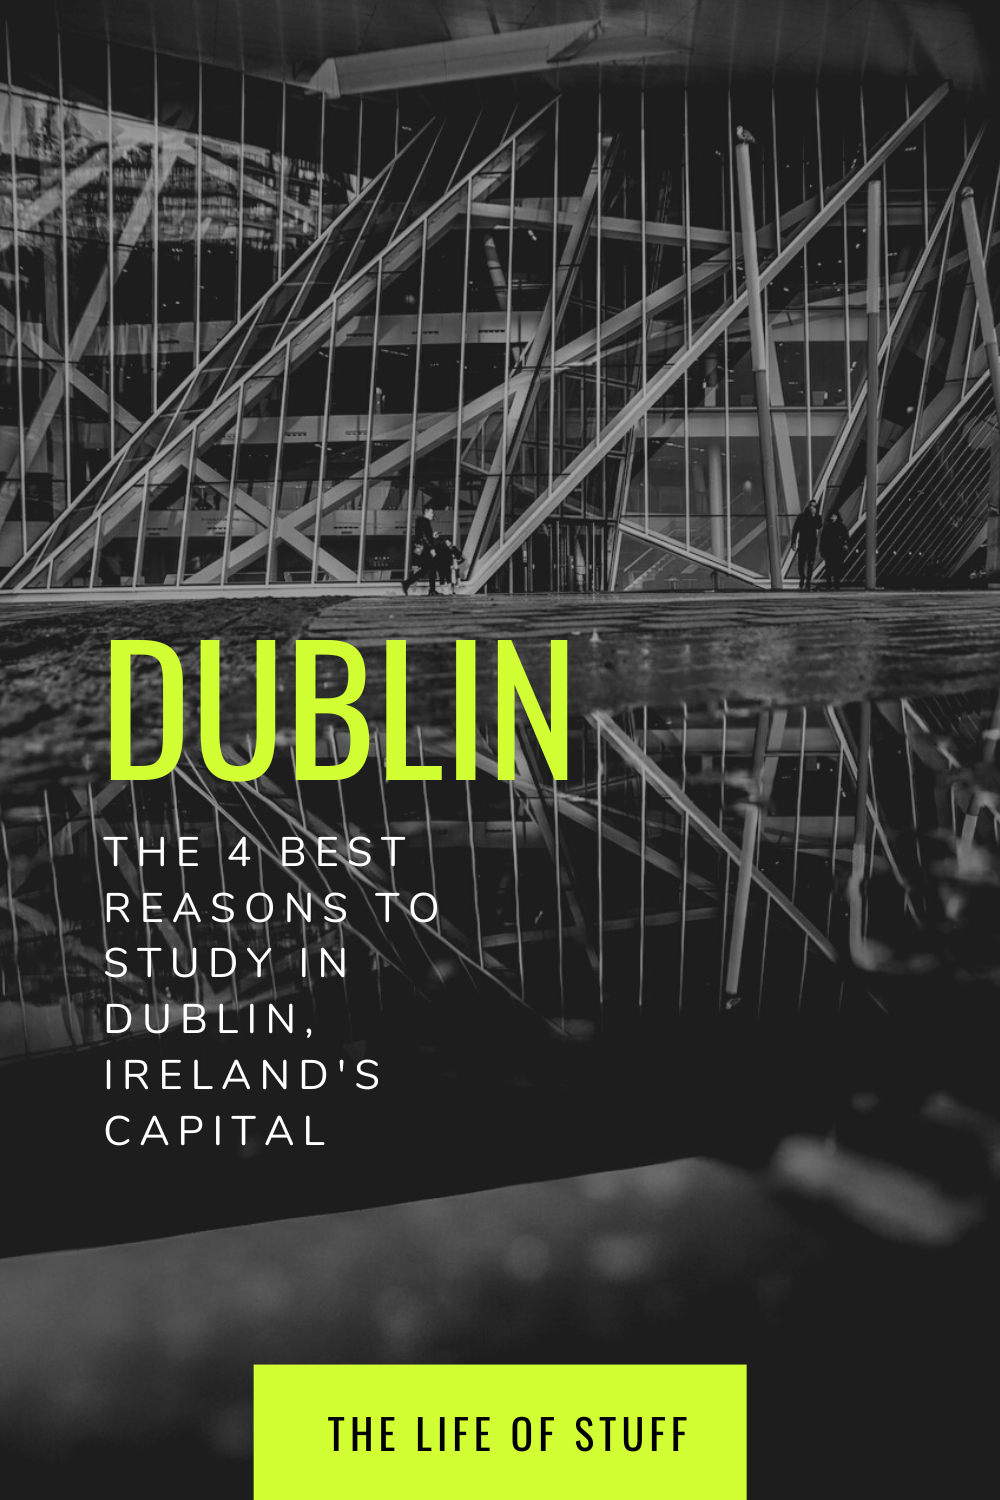 The 4 Best Reasons to Study in Dublin, Ireland's Capital - The Life of Stuff